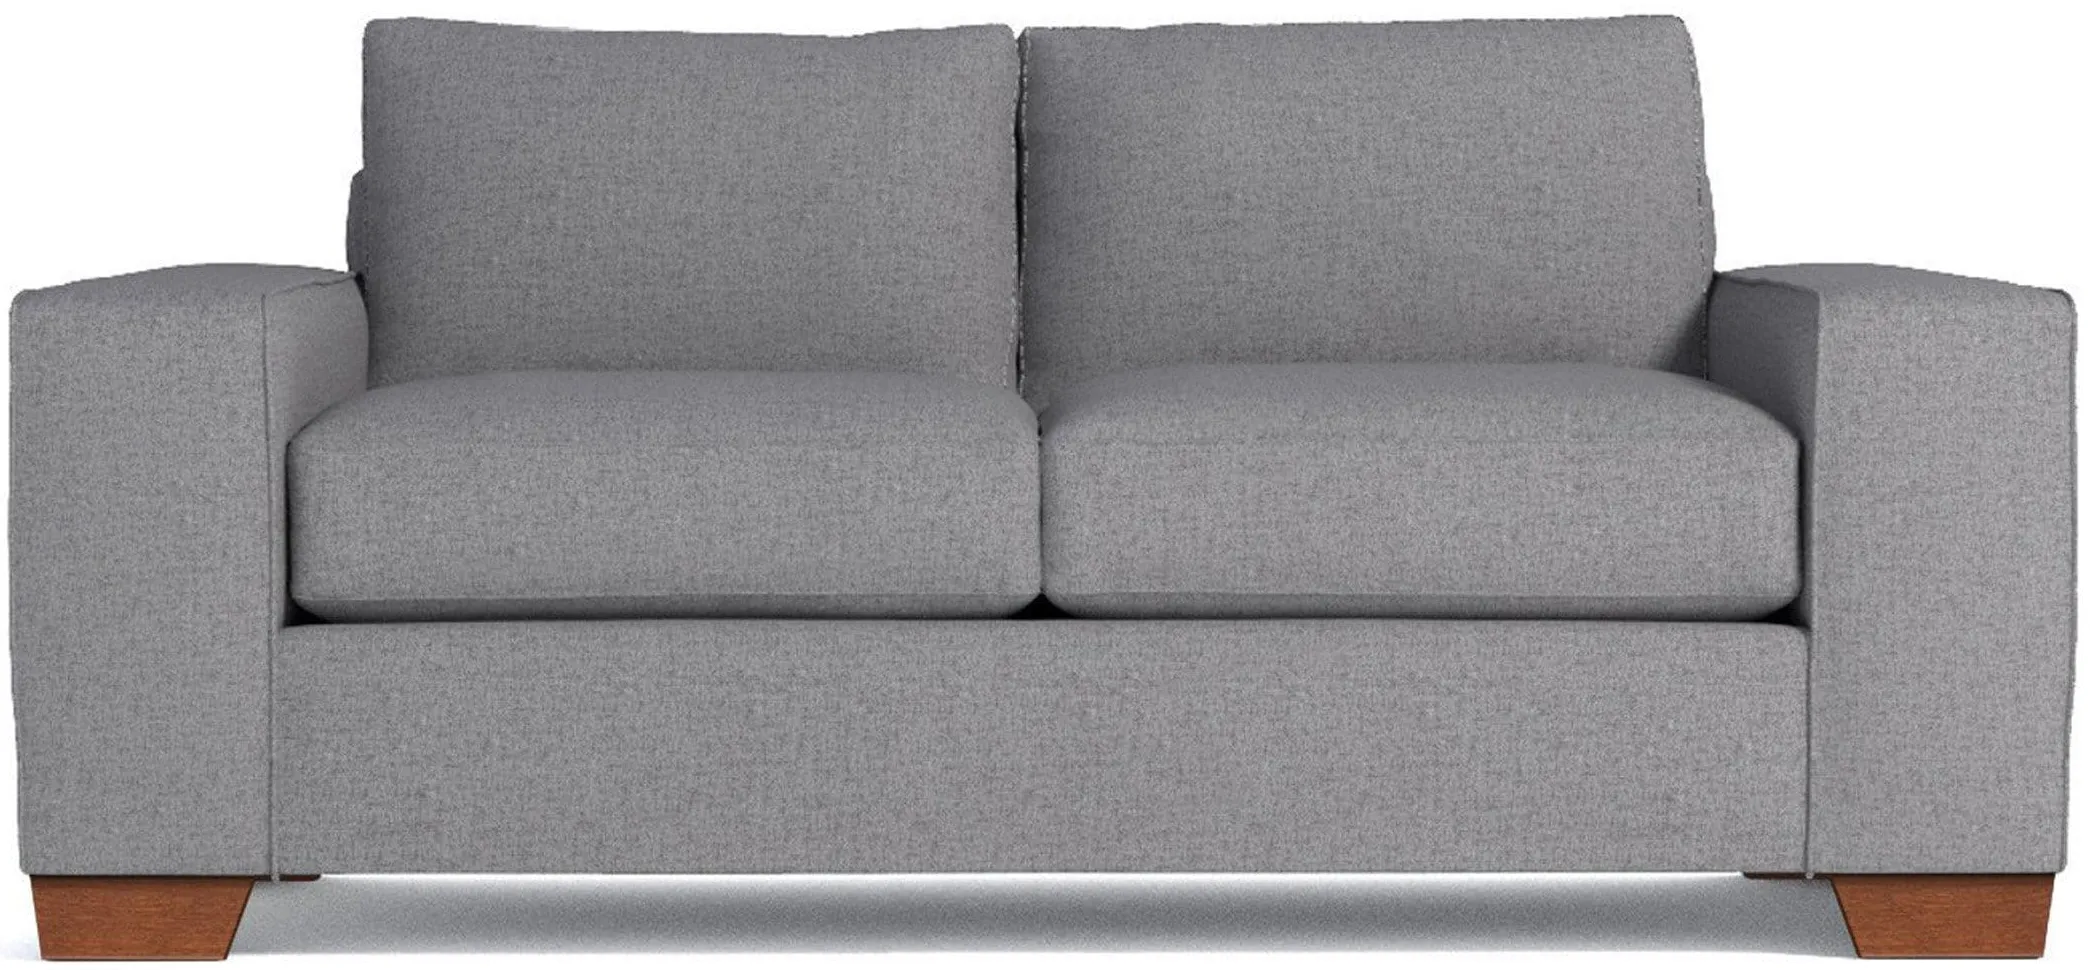 Melrose Apartment Size Sleeper Sofa Bed